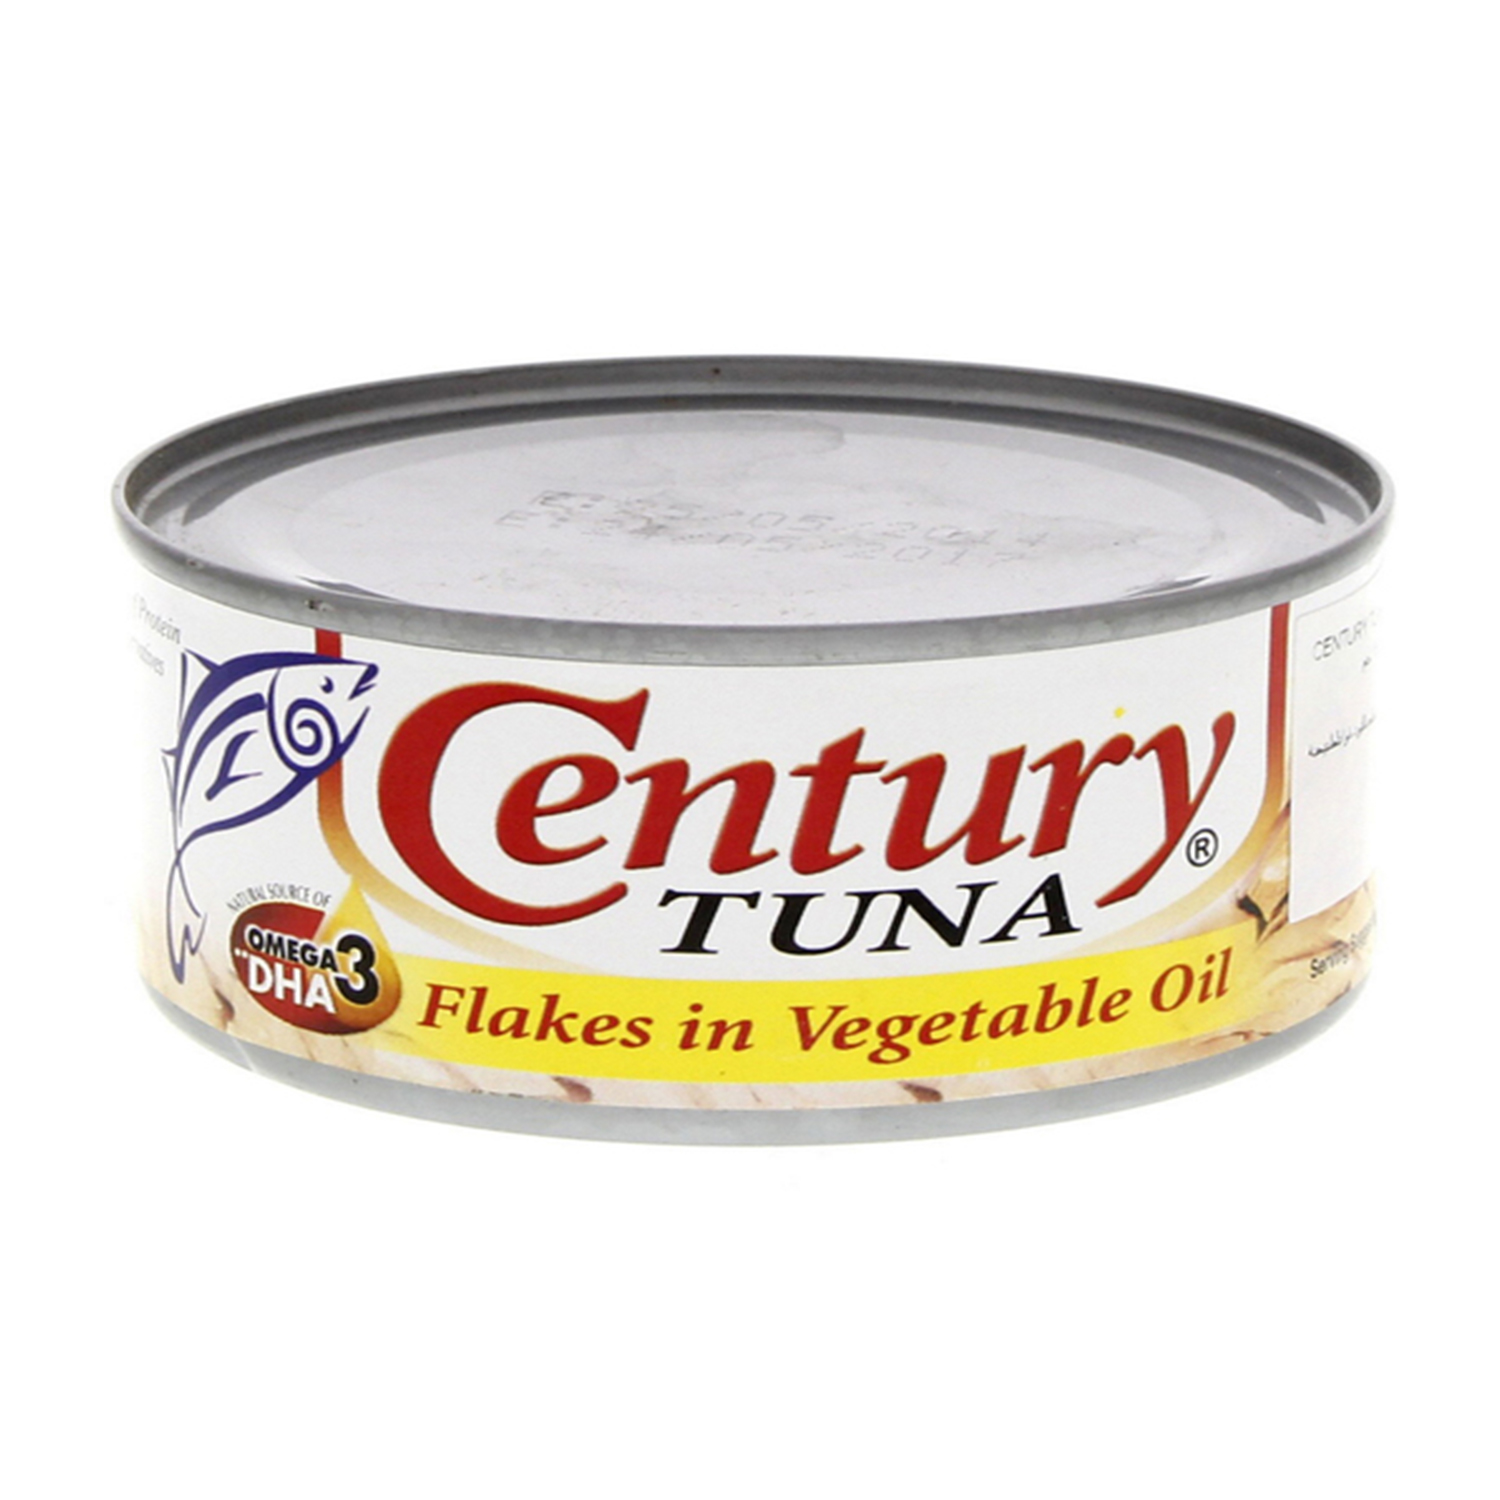 Century Tuna 48 Packs Flakes In Vegetable Oil 180g - Carlo Pacific